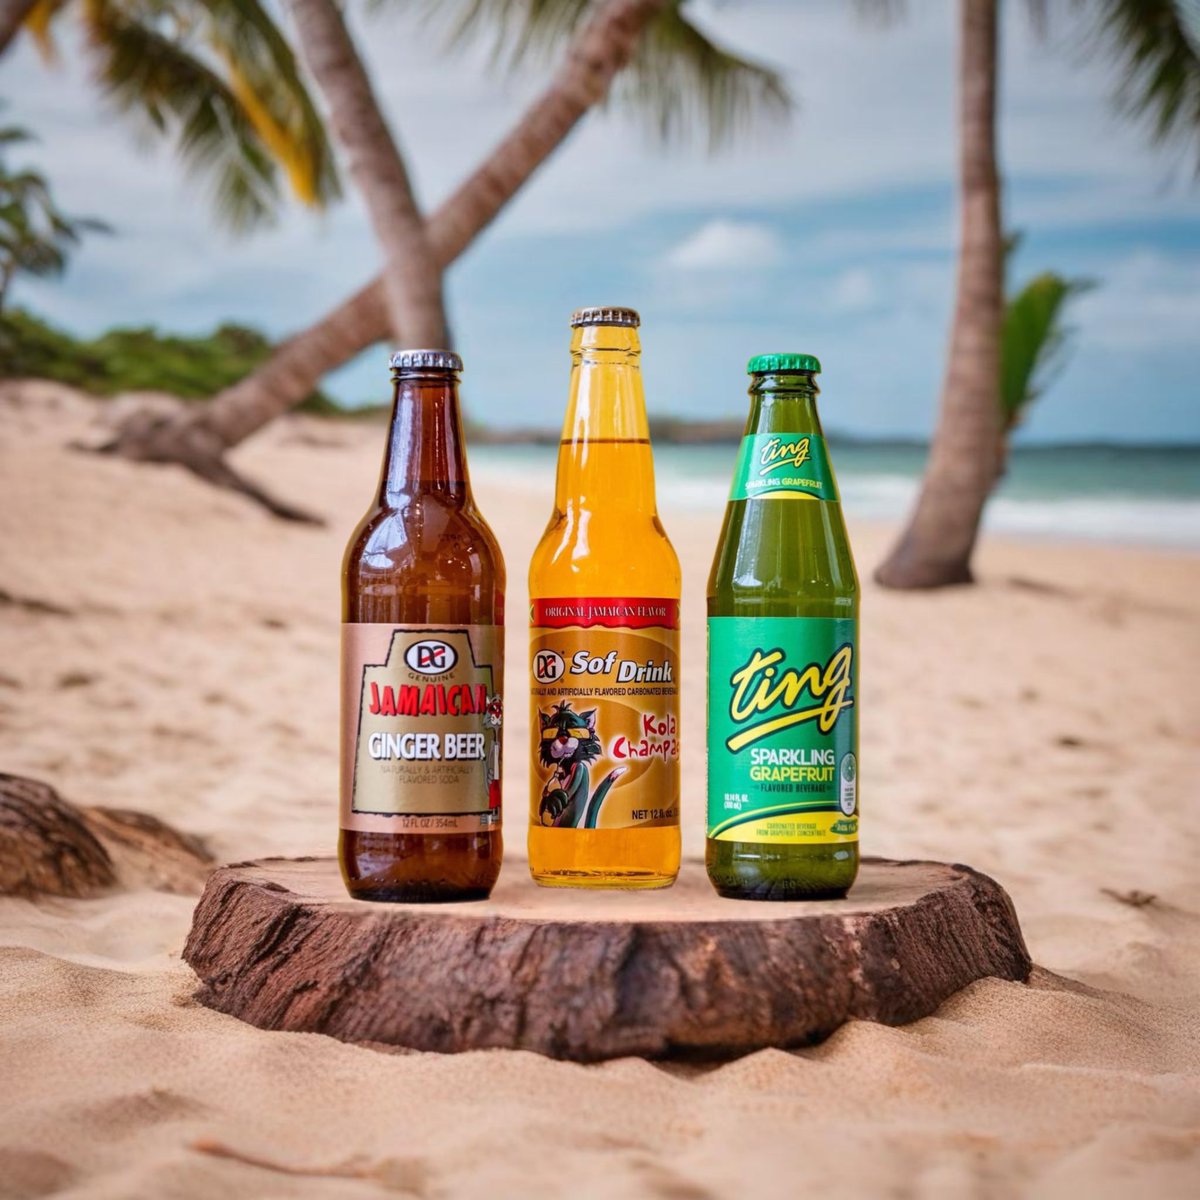 💦Wash down some delicious Jerk Chicken Tacos with these awesome beverages!🌮🌮🌮🥤🧉 #happytacotuesday #gotjerk #jerkchicken #tacostacostacos #islandlife #jamaicajamaica